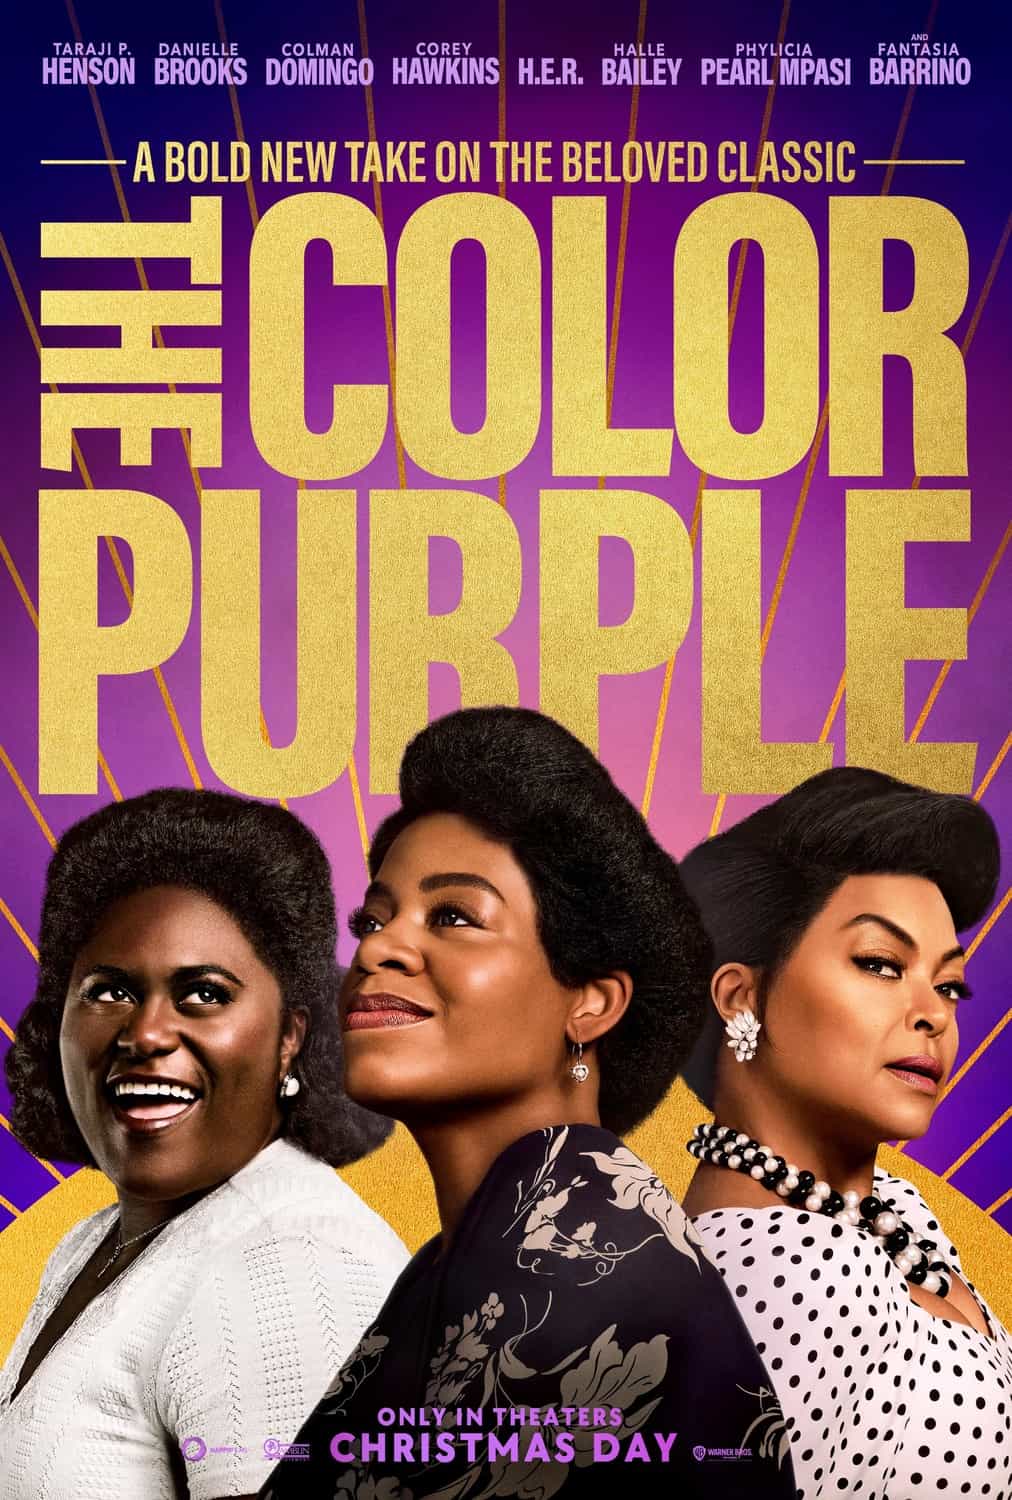 New poster has been released for The Colour Purple which stars Taraji P. Henson and Danielle Brooks - movie UK release date 26th January 2024 #thecolourpurple